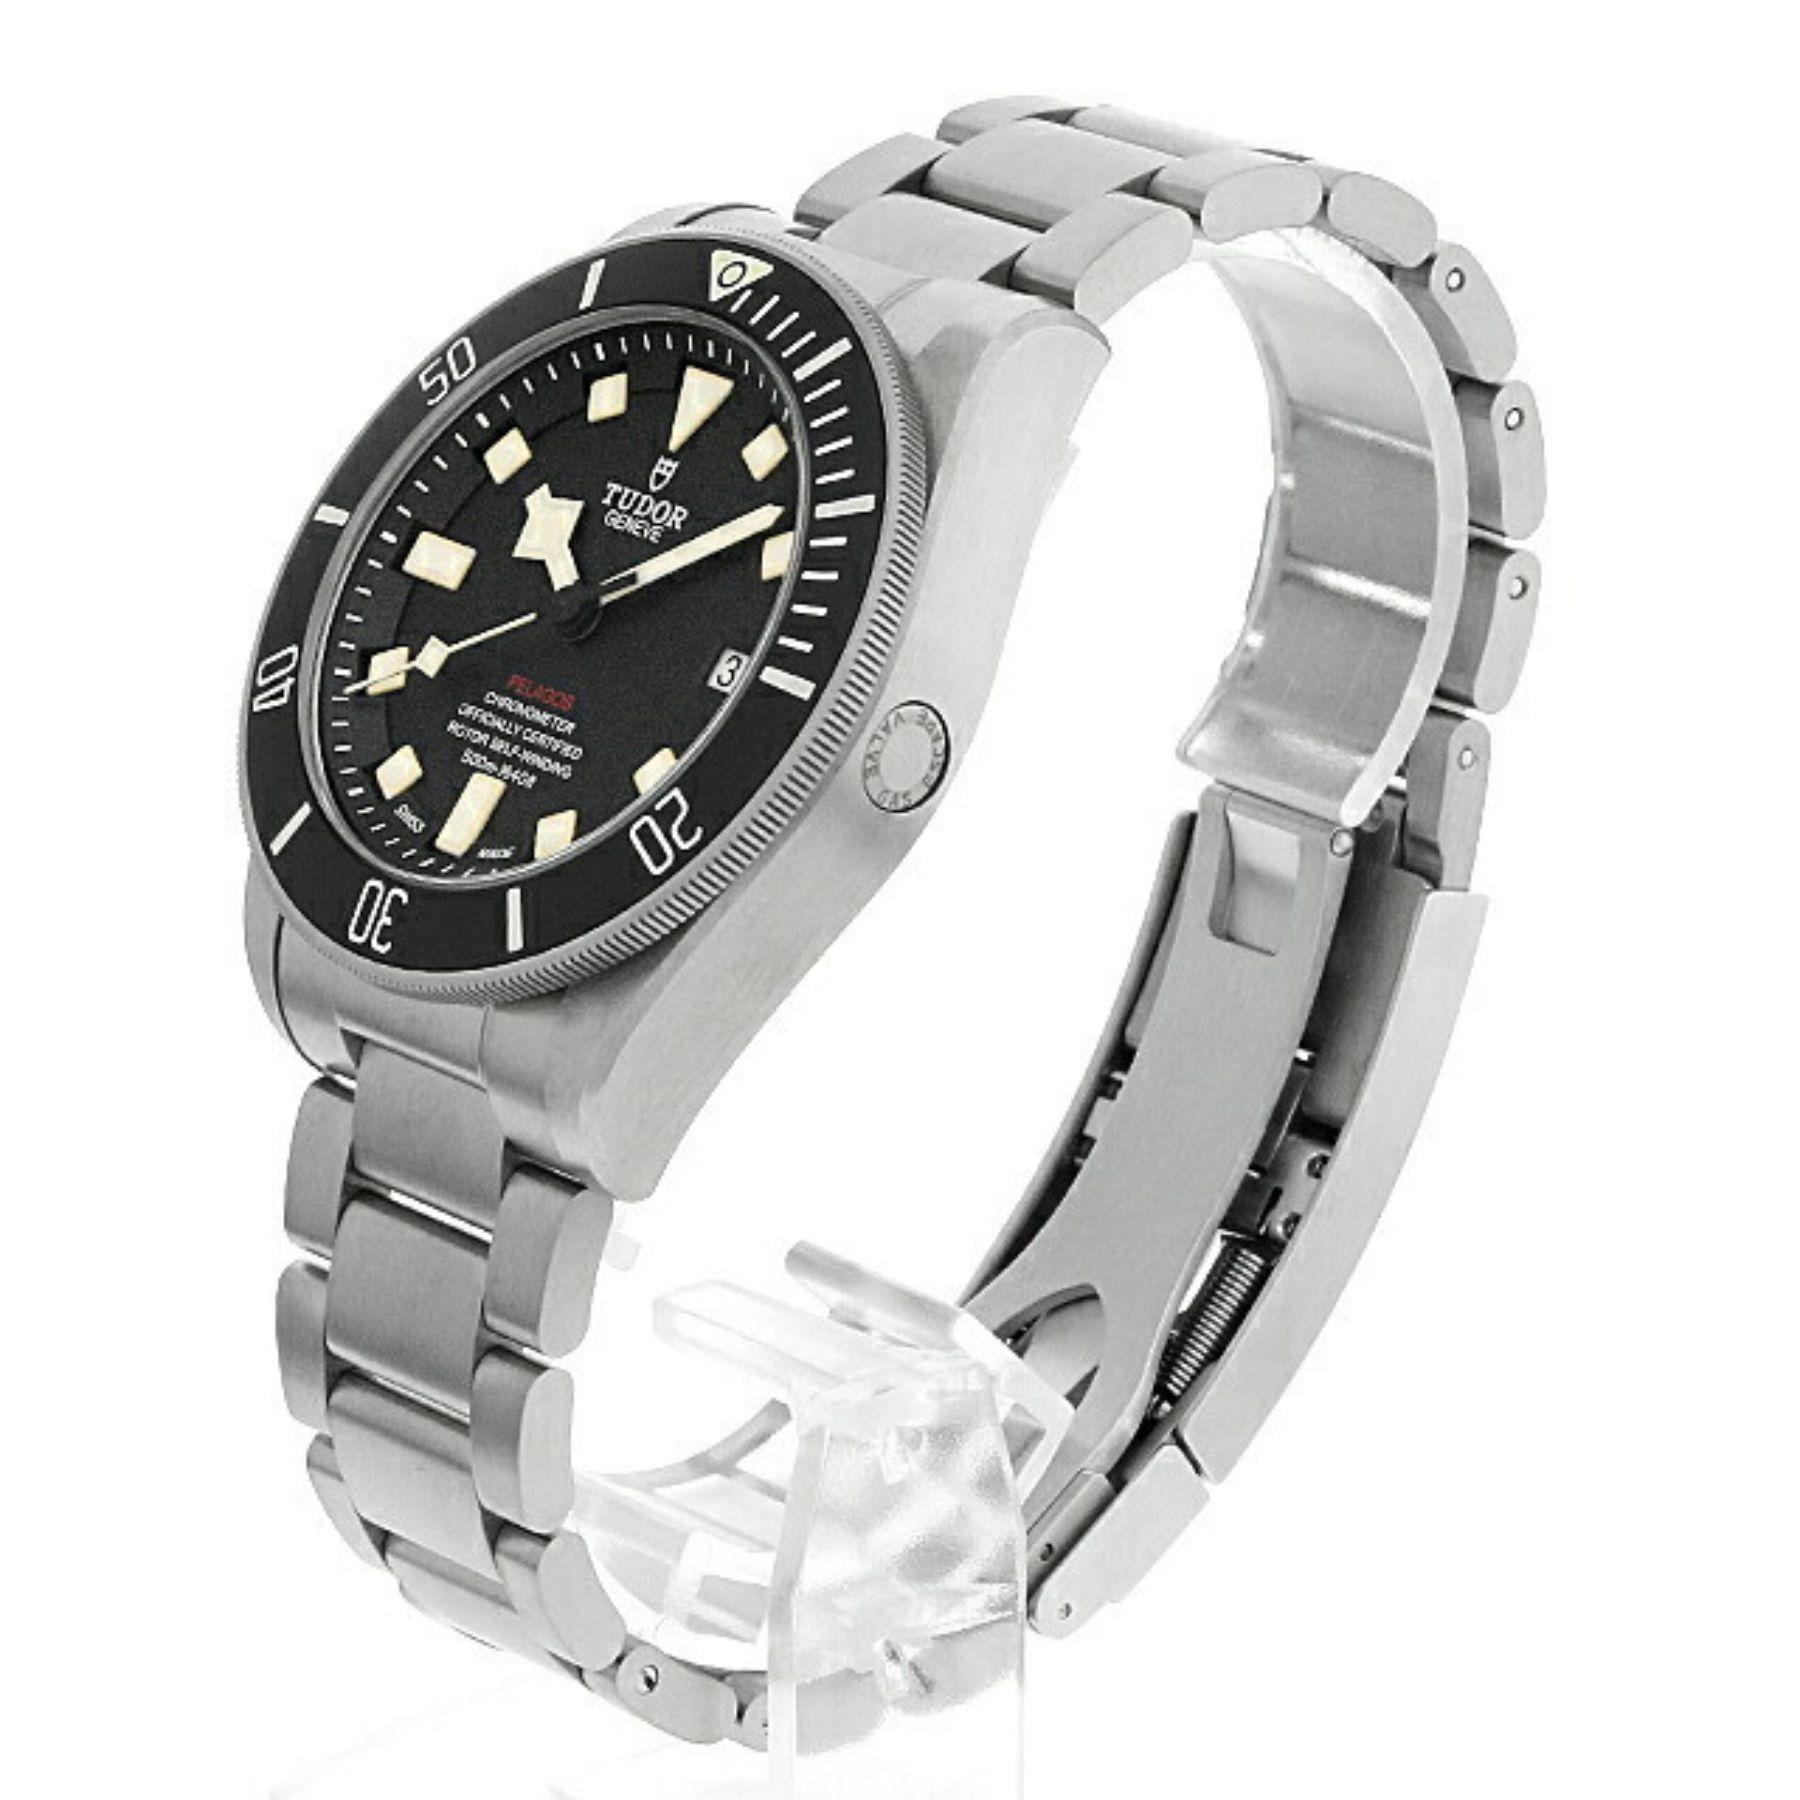 Explore the depths of style and functionality with the Tudor Pelagos 25610TNL, a pre-owned men's watch that exemplifies the perfect blend of modern technology and classic design. This timepiece, expertly crafted from titanium, features a robust